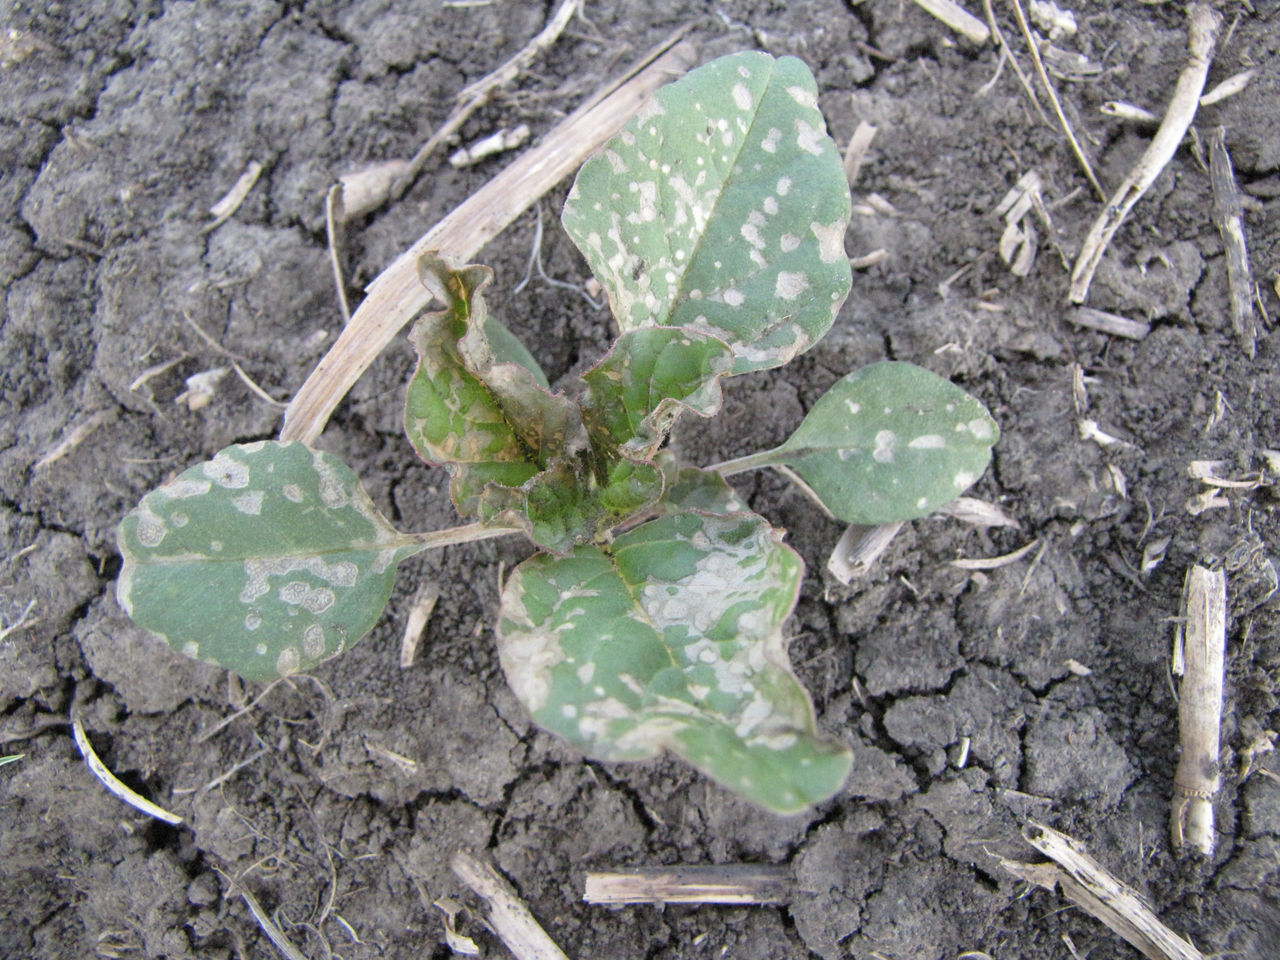 Water-soaked lesions on redroot pigweed are early symptoms of Group 14 herbicide activity. Mode of Action: Protoporphyrinogen IX oxidase (PPO) inhibitors 